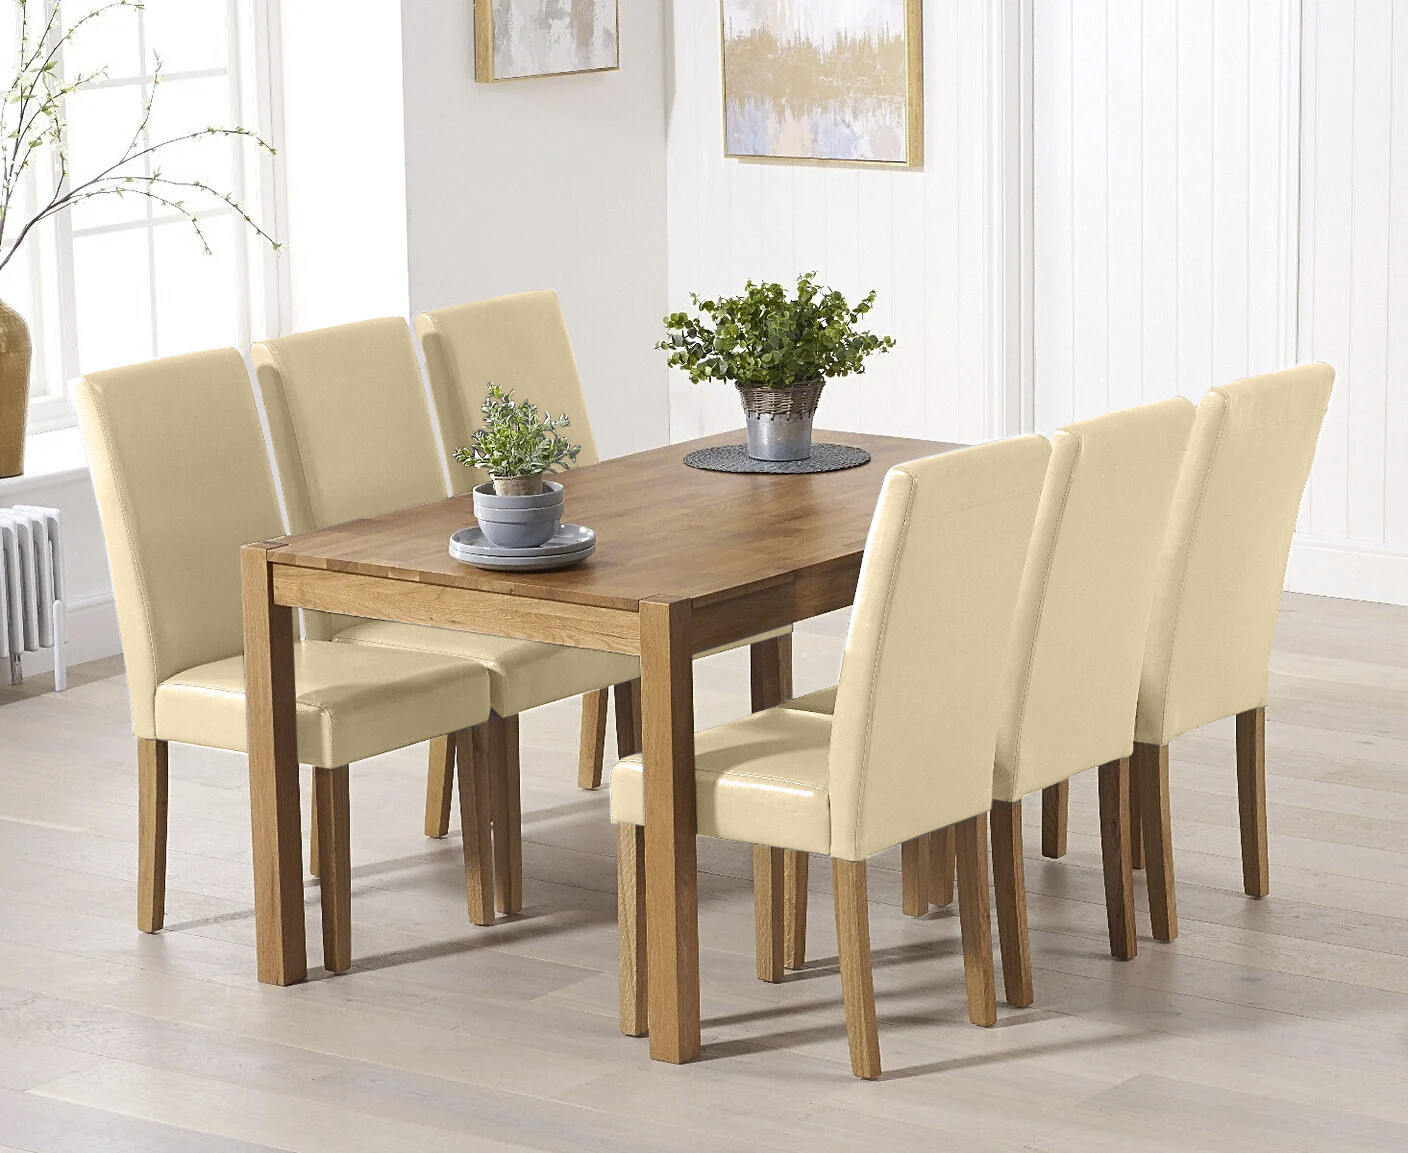 Photo 2 of Oxford 150cm solid oak dining table with 6 grey olivia chairs